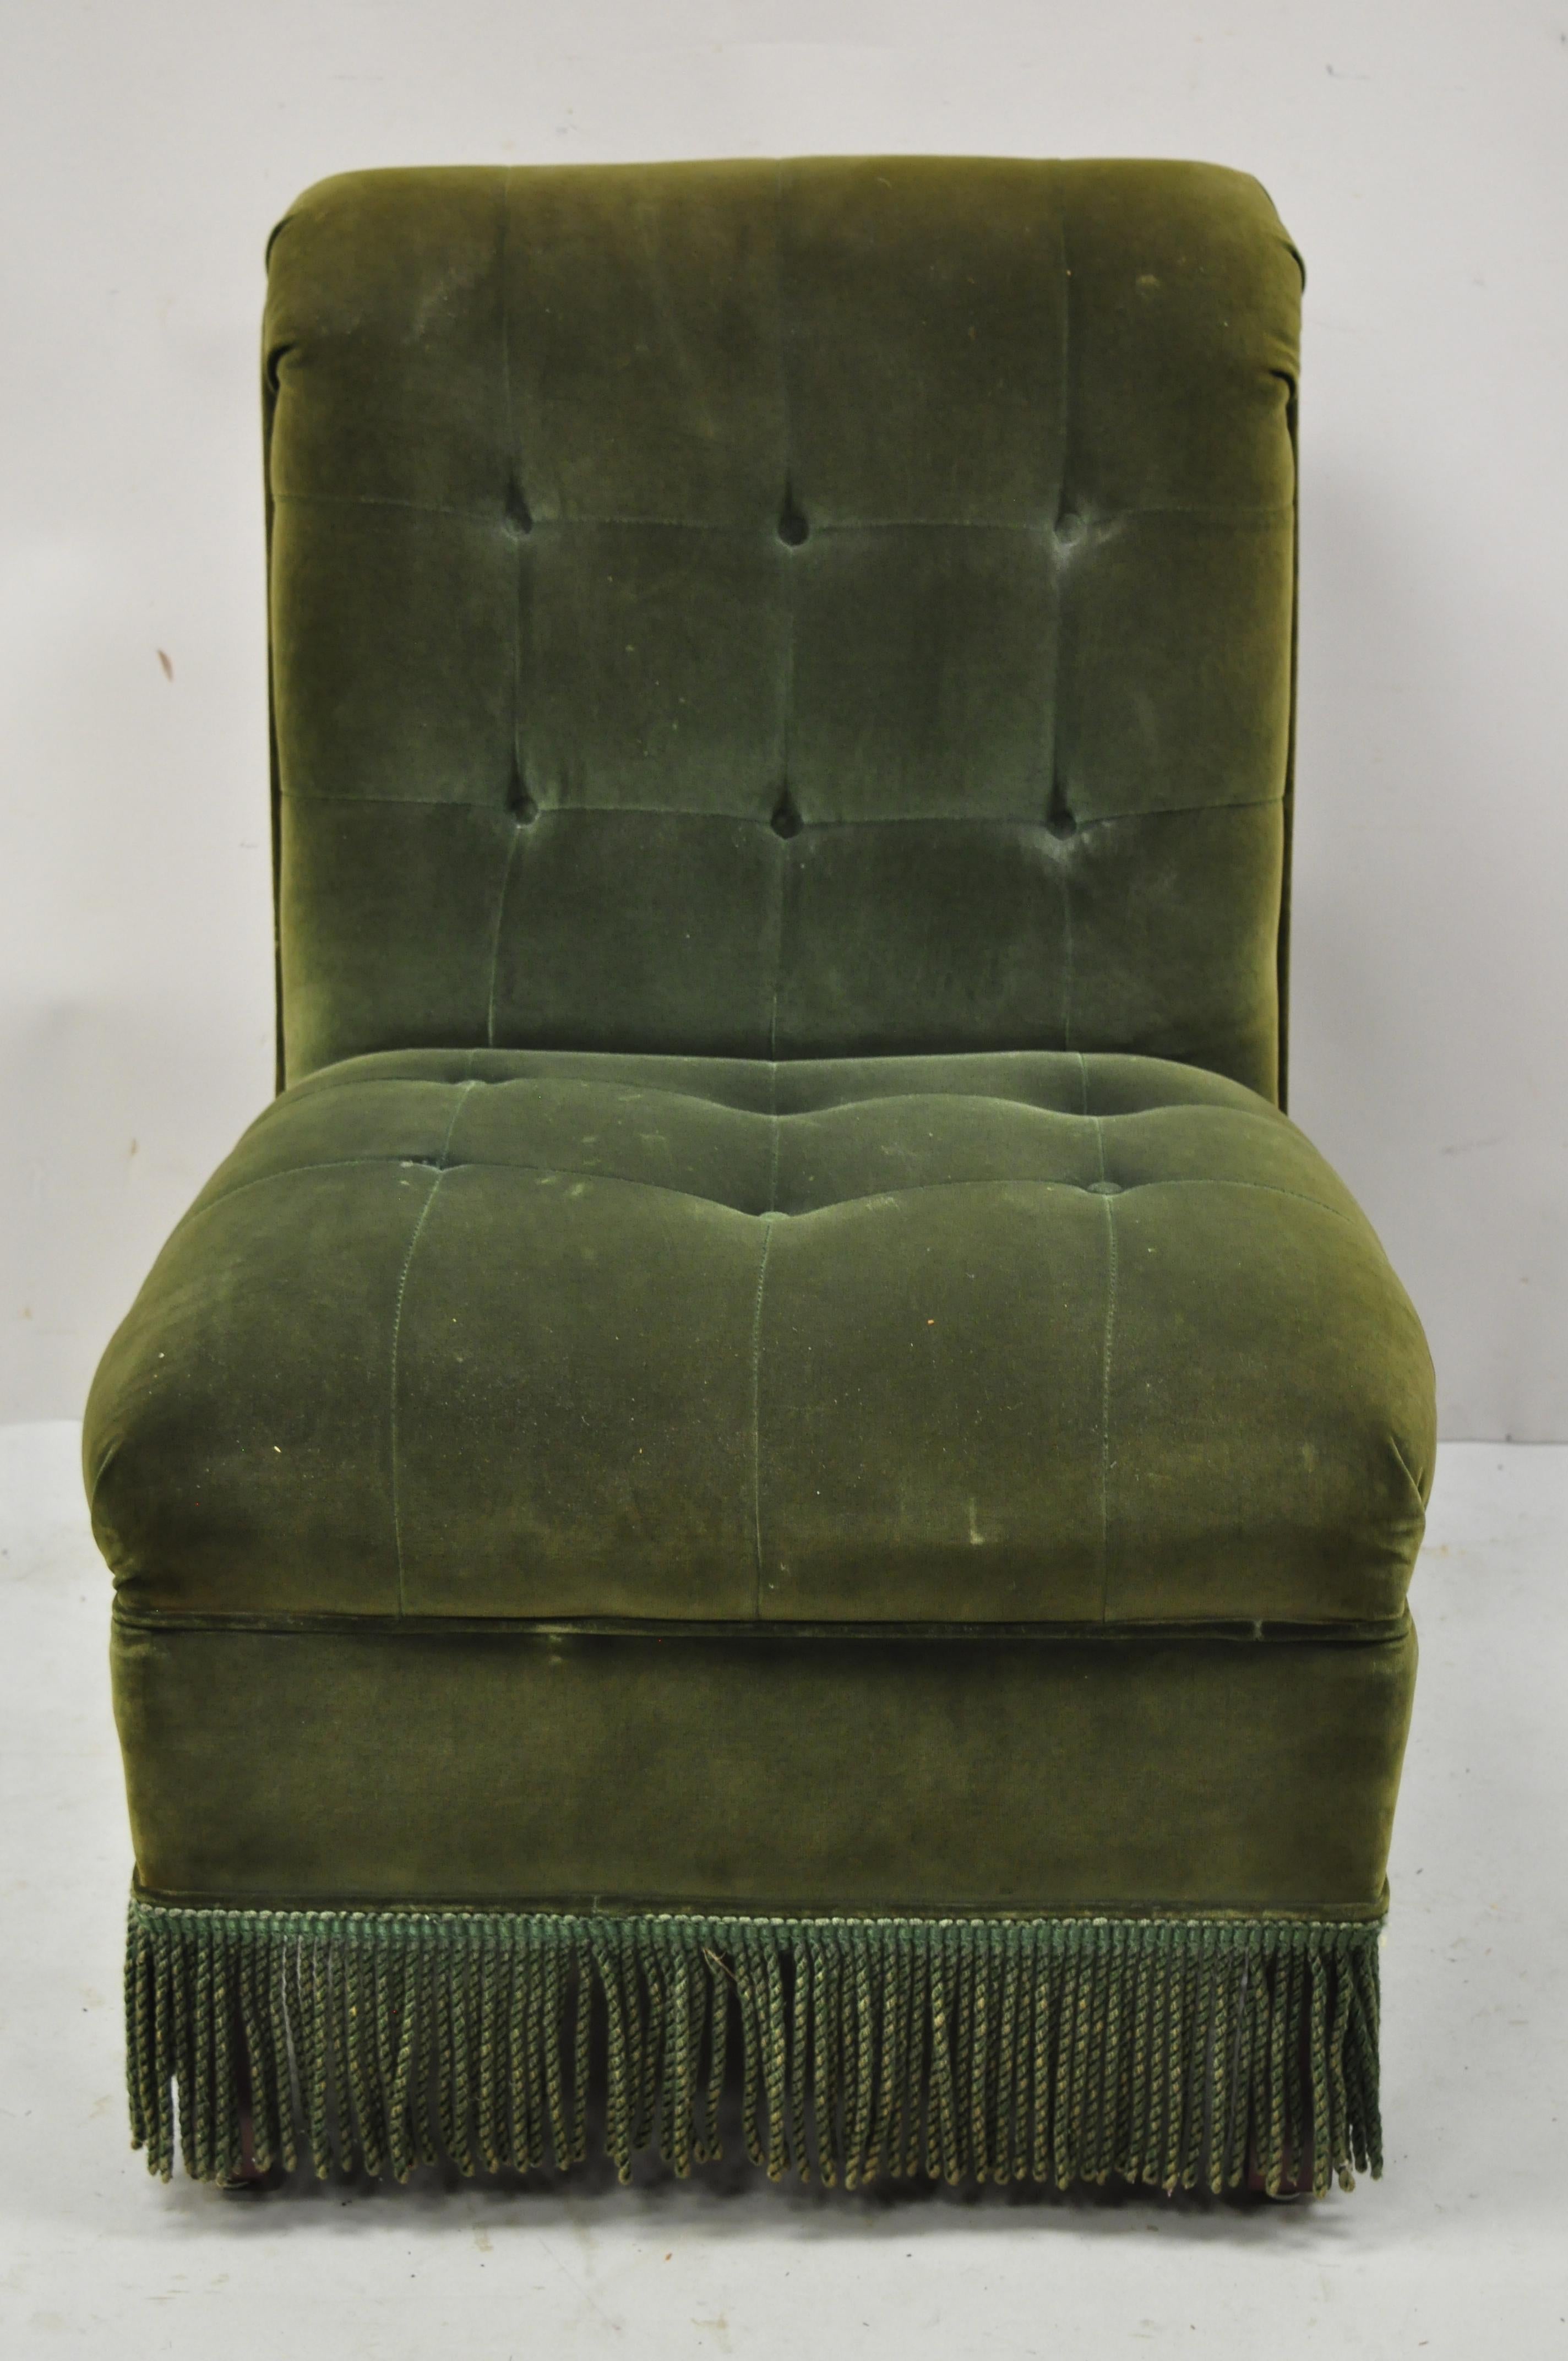 Antique Art Deco green mohair/velvet rolled back slipper lounge chair w/ fringed skirt. Item features tufted green original upholstery, fringed skirt, rolled back, solid wood legs, solid wood frame, very nice antique item, great style and form,